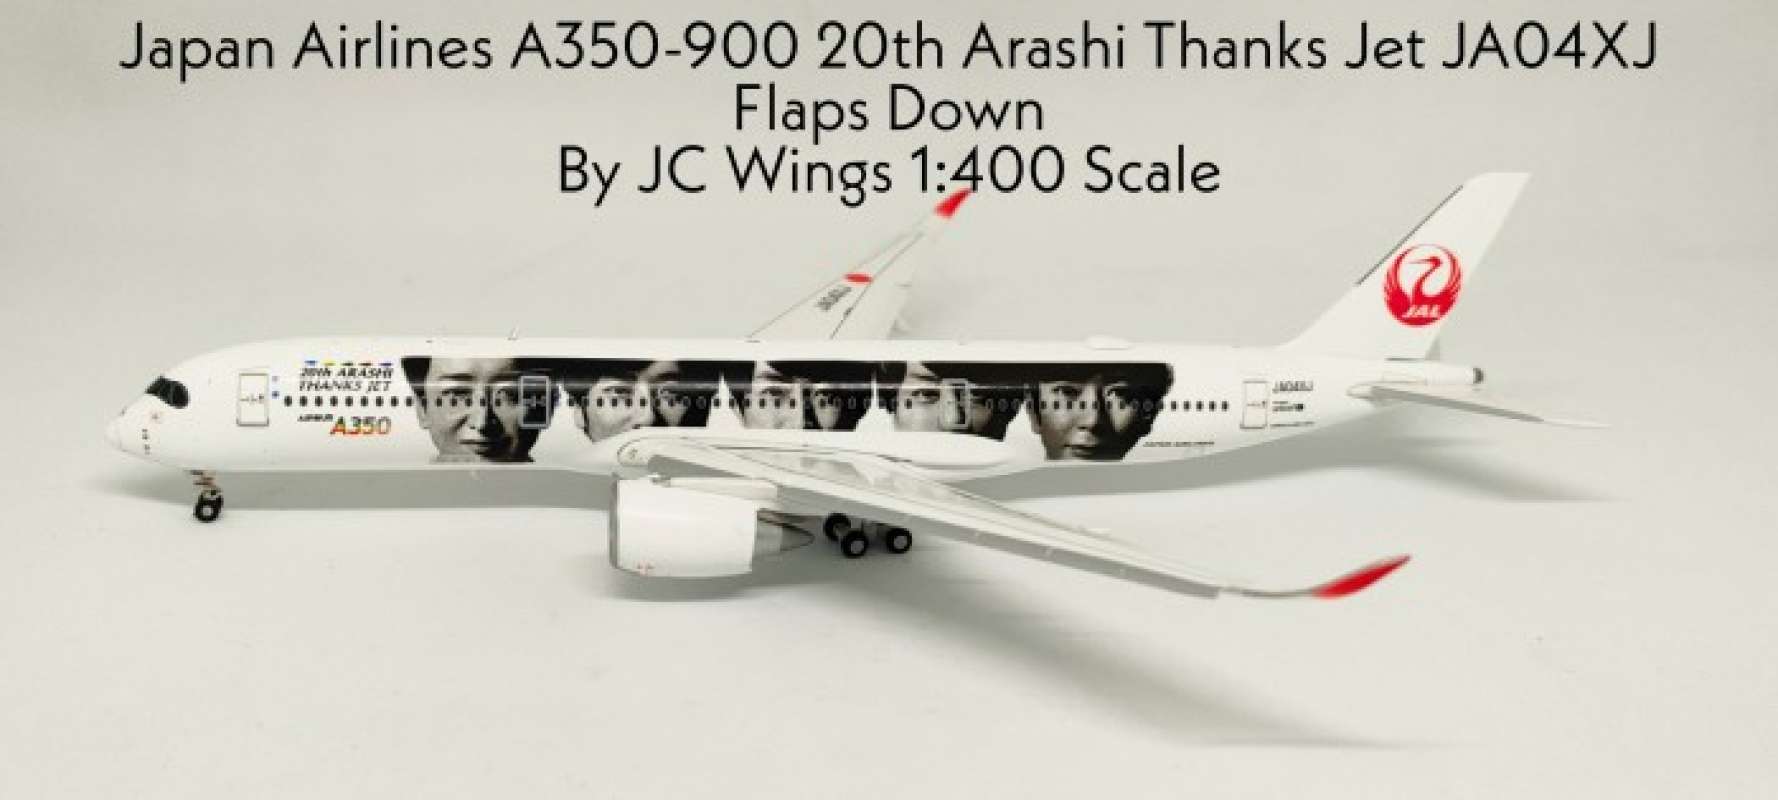 Promo Japan Airlines A350-900 20th Arashi Thanks Jet By JC Wings 1